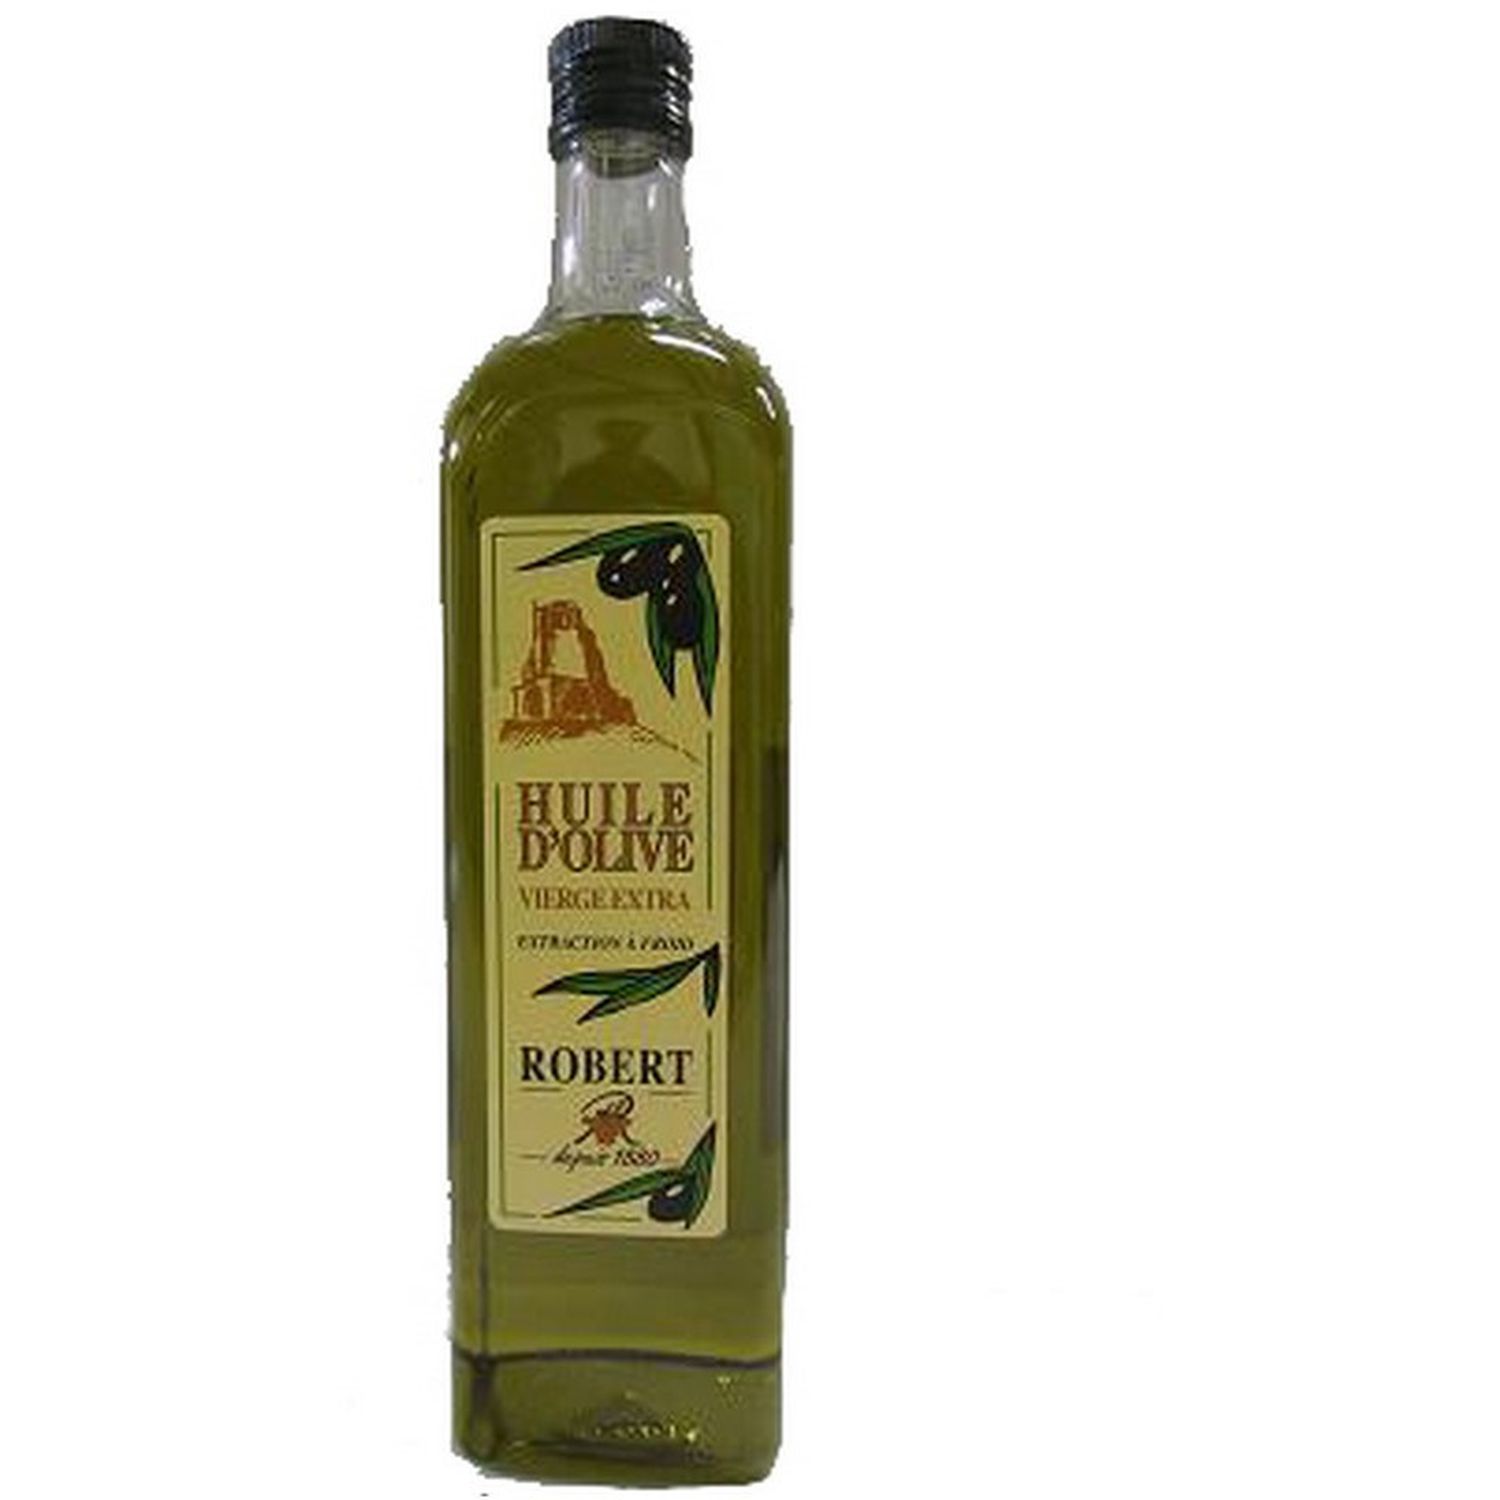 ROBERT Huile d'olive vierge extra 75cl pas cher 